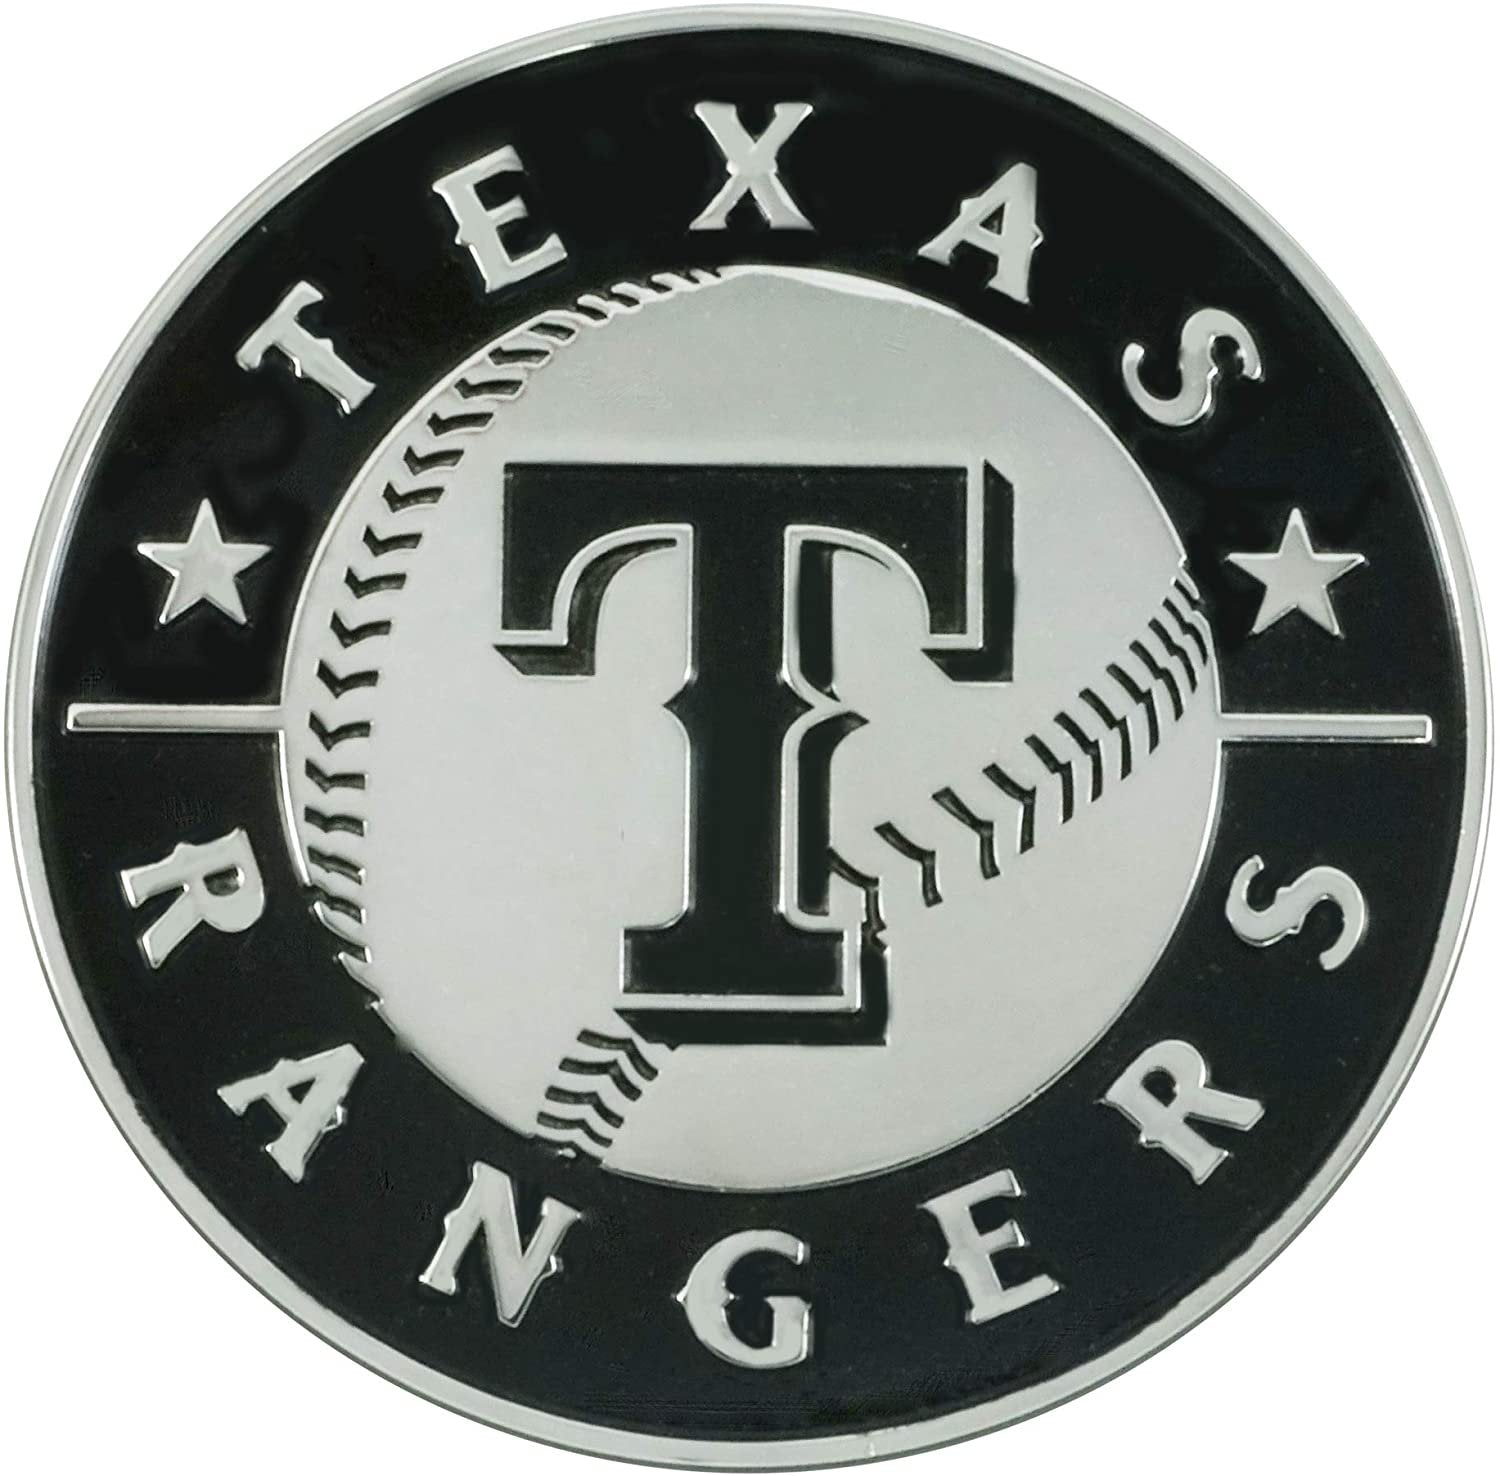 Texas Rangers Solid Metal Raised Auto Emblem Decal Adhesive Backing